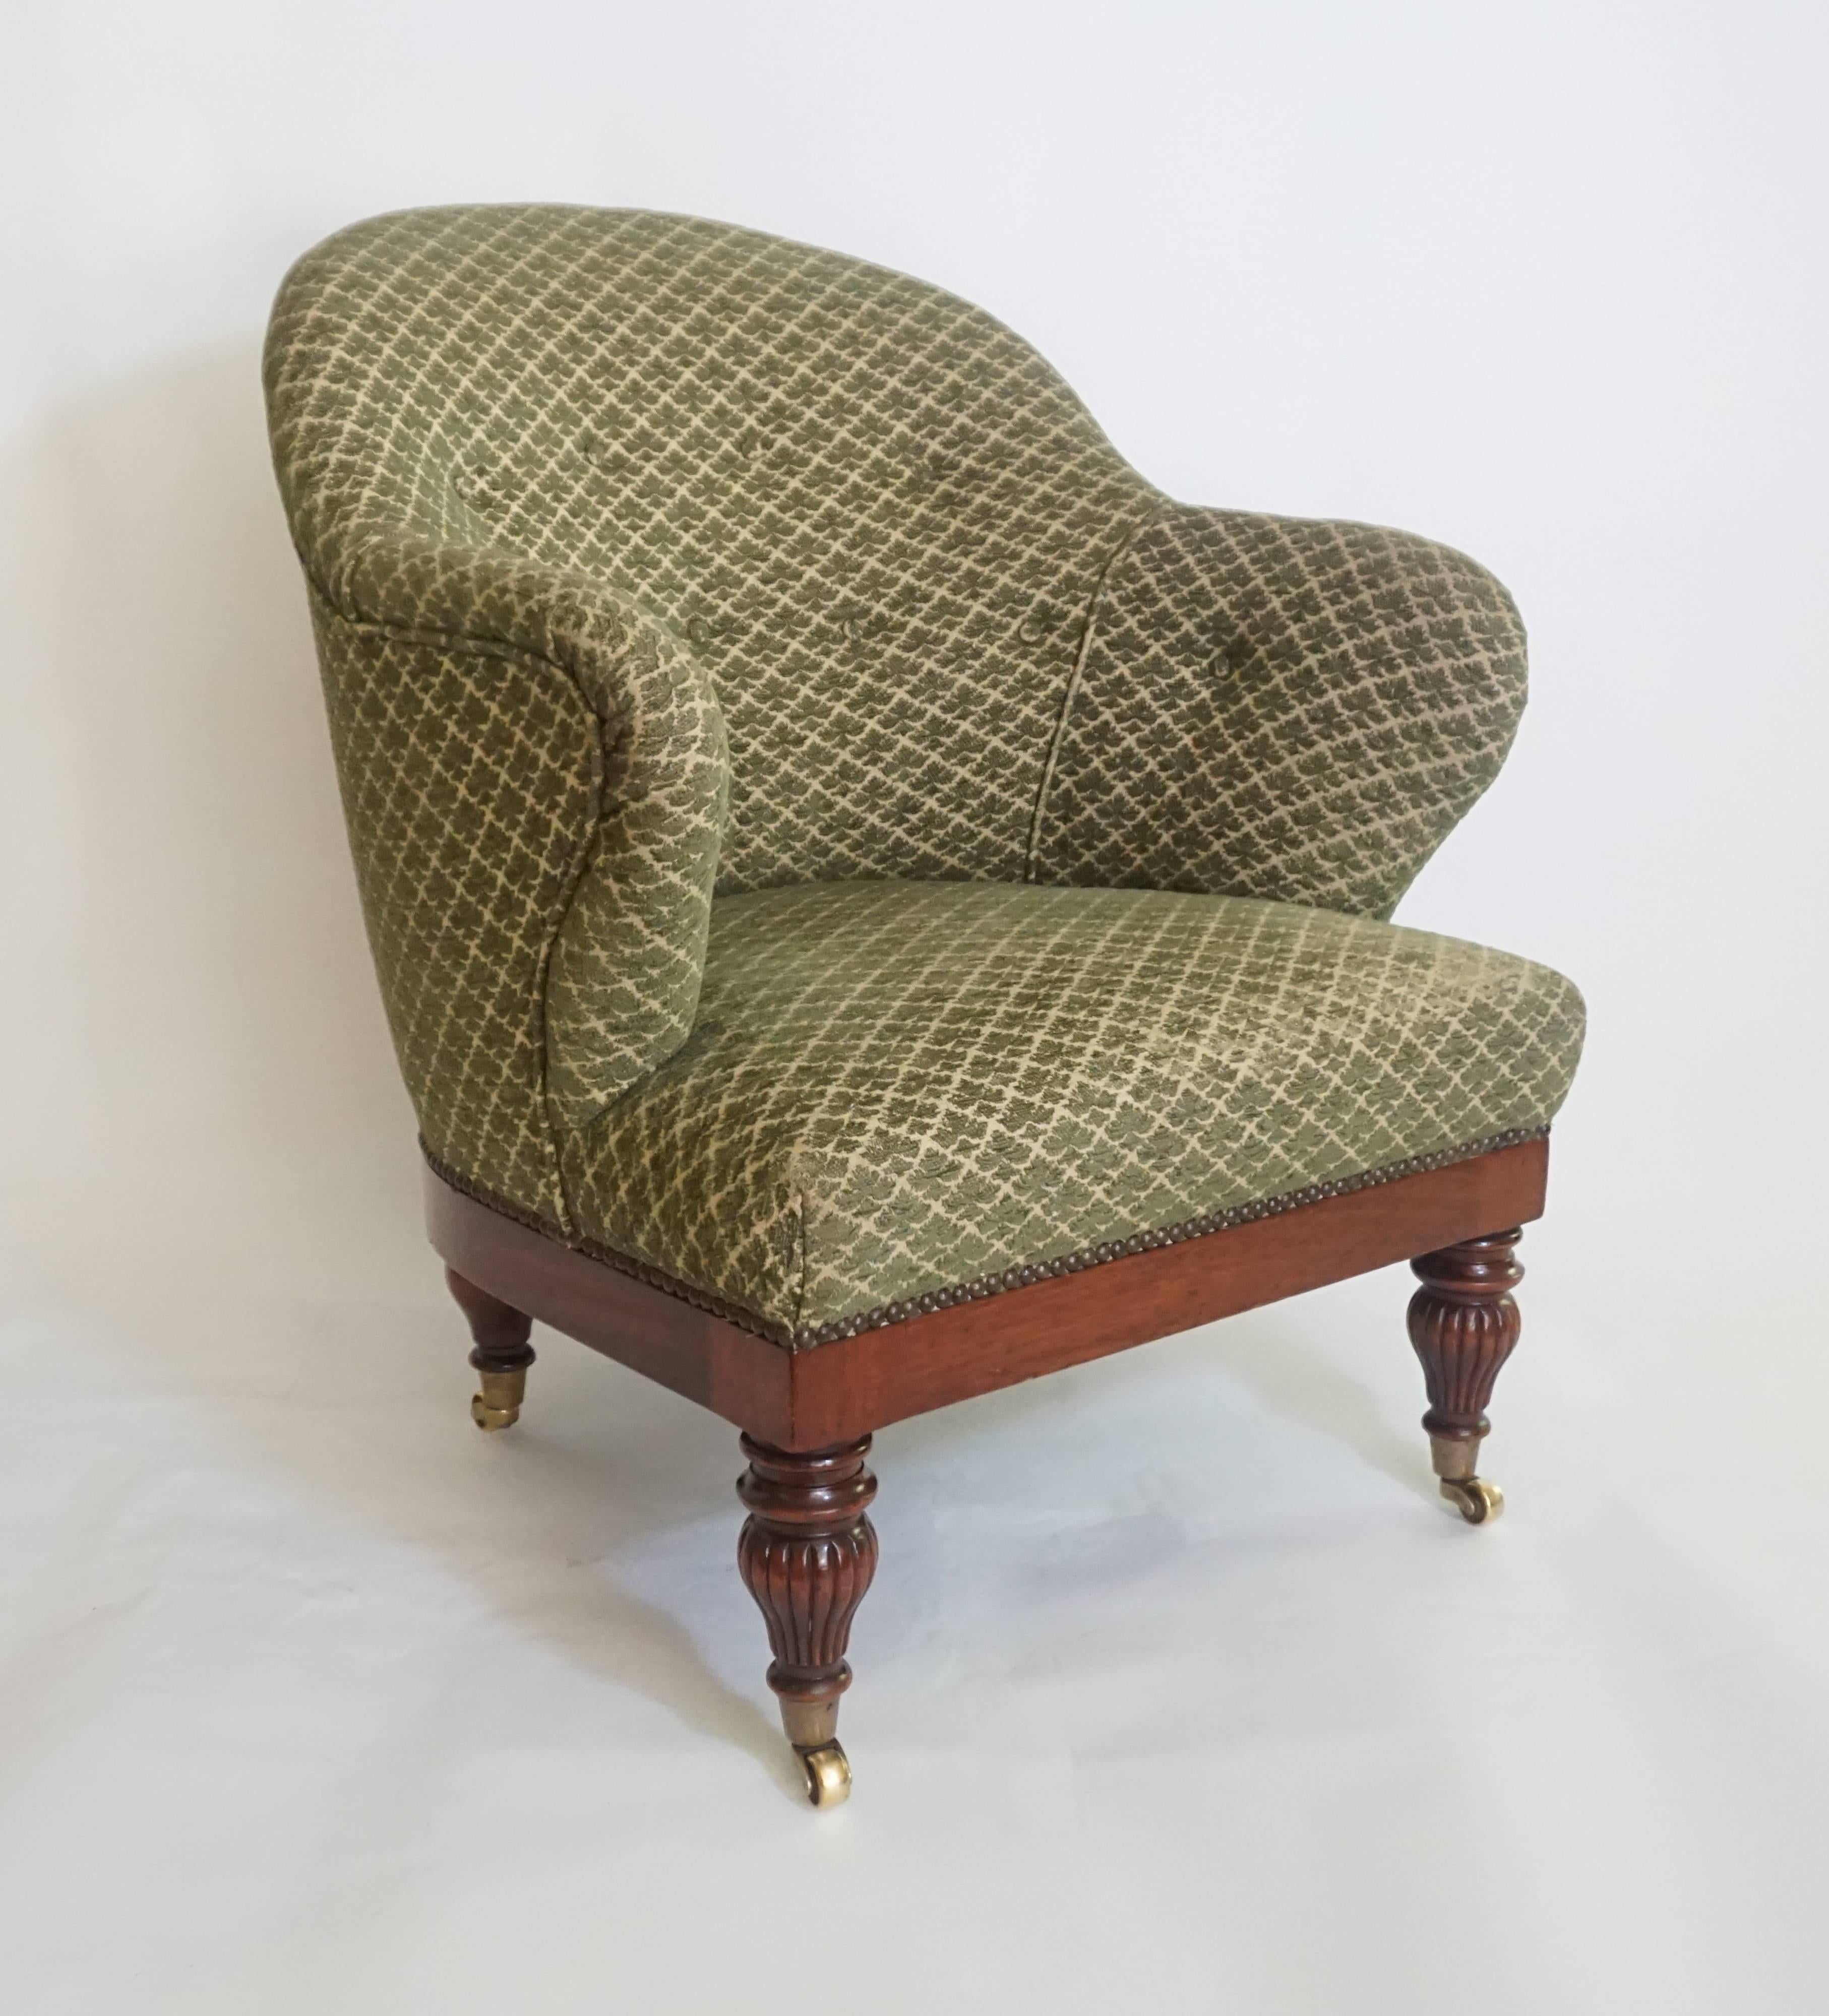 English Regency style Edwardian period tub or club chair attributed to famous London firm Howard and Sons having upholstered frame with 